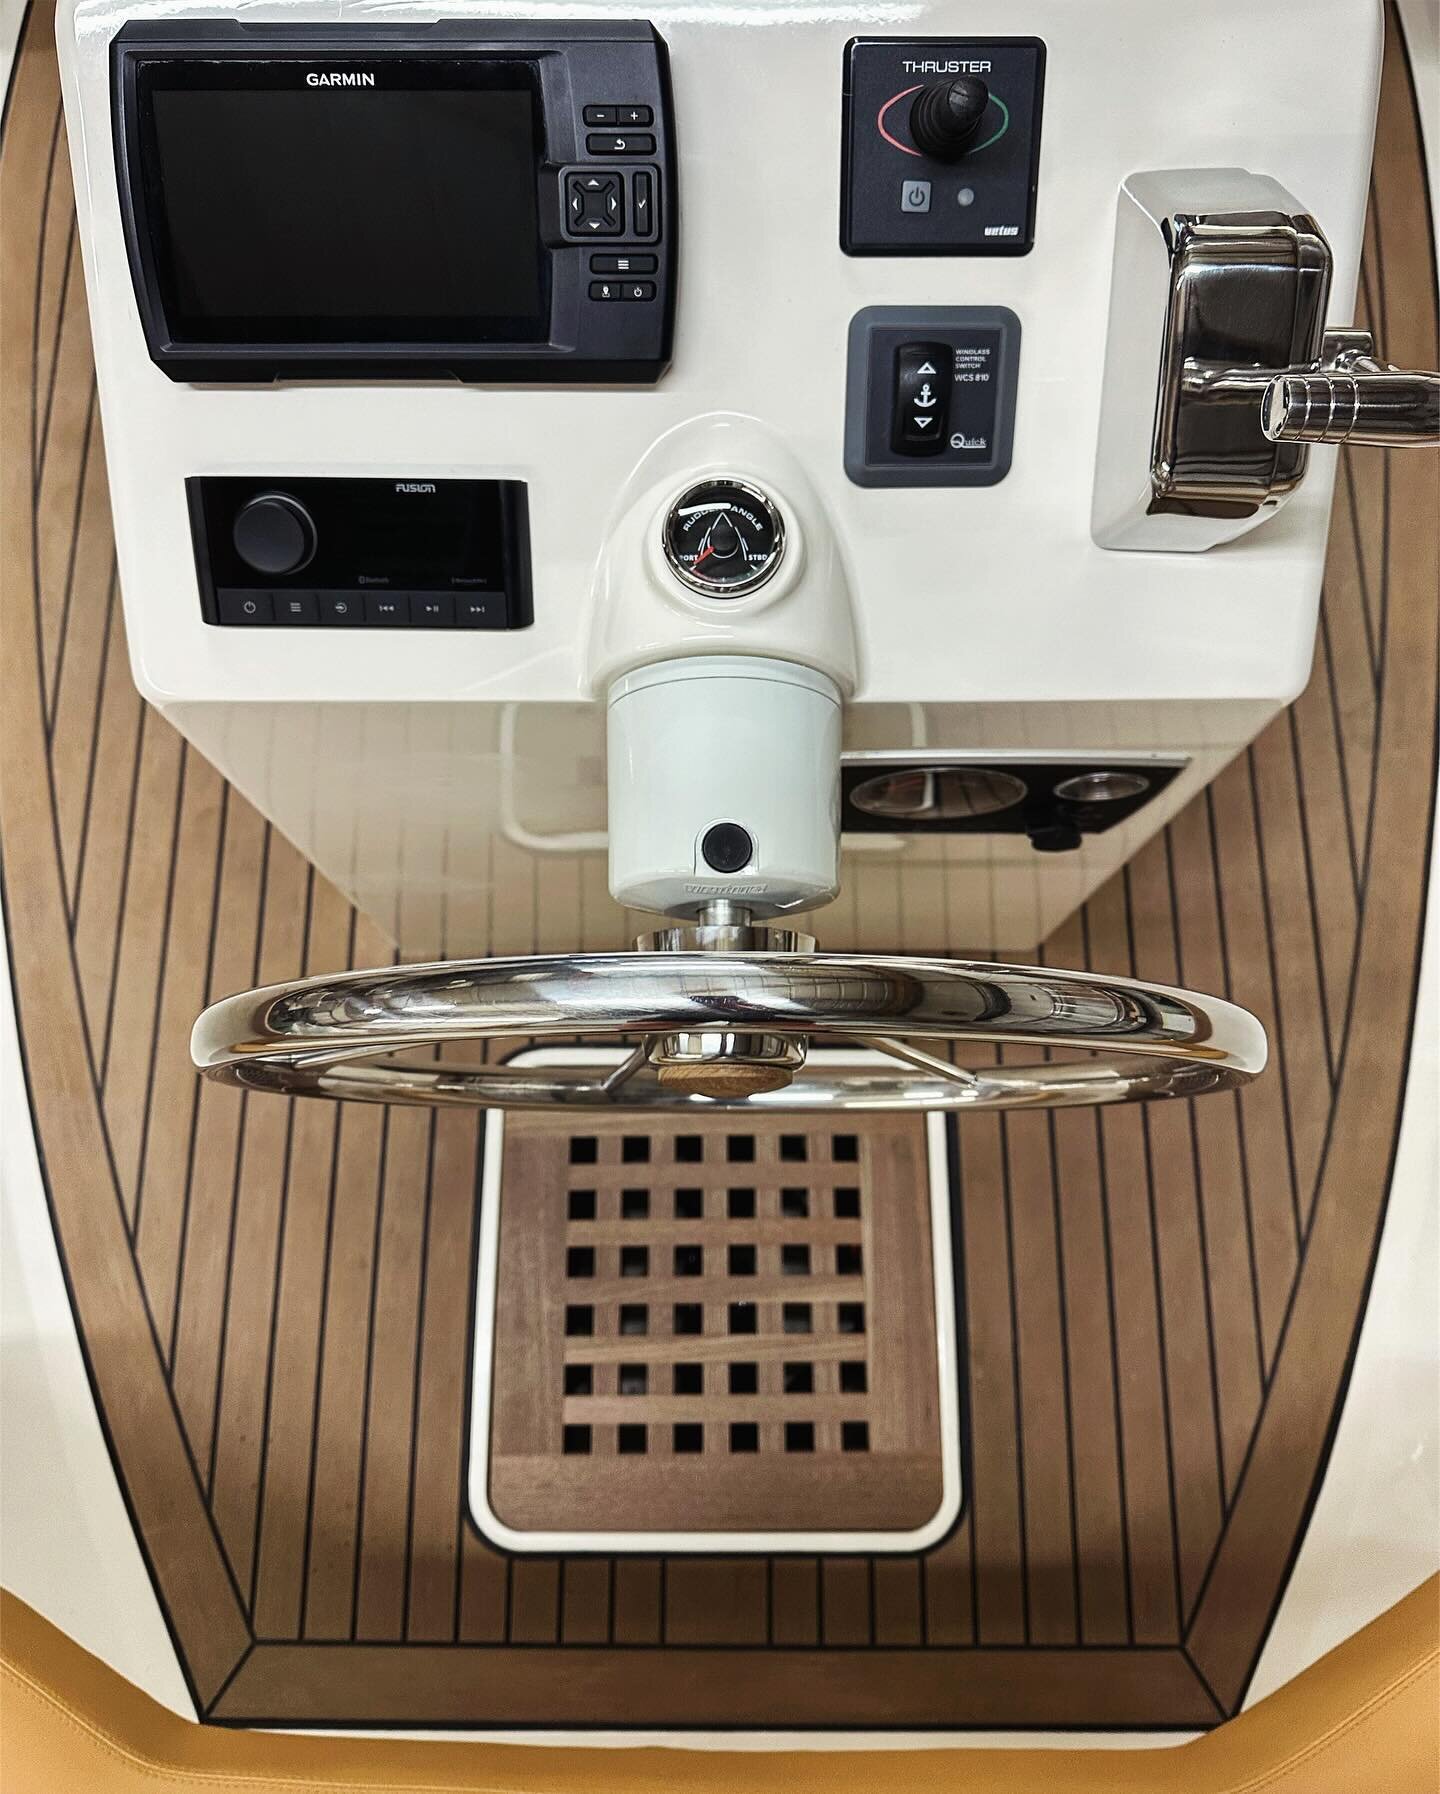 The Heart of the #Salcombe600 is at the Helm, where all the essential controls for navigating the waters are conveniently located. The #centerconsole offers a complete view of the vessel, making it the perfect spot for steering.

Some of the several 